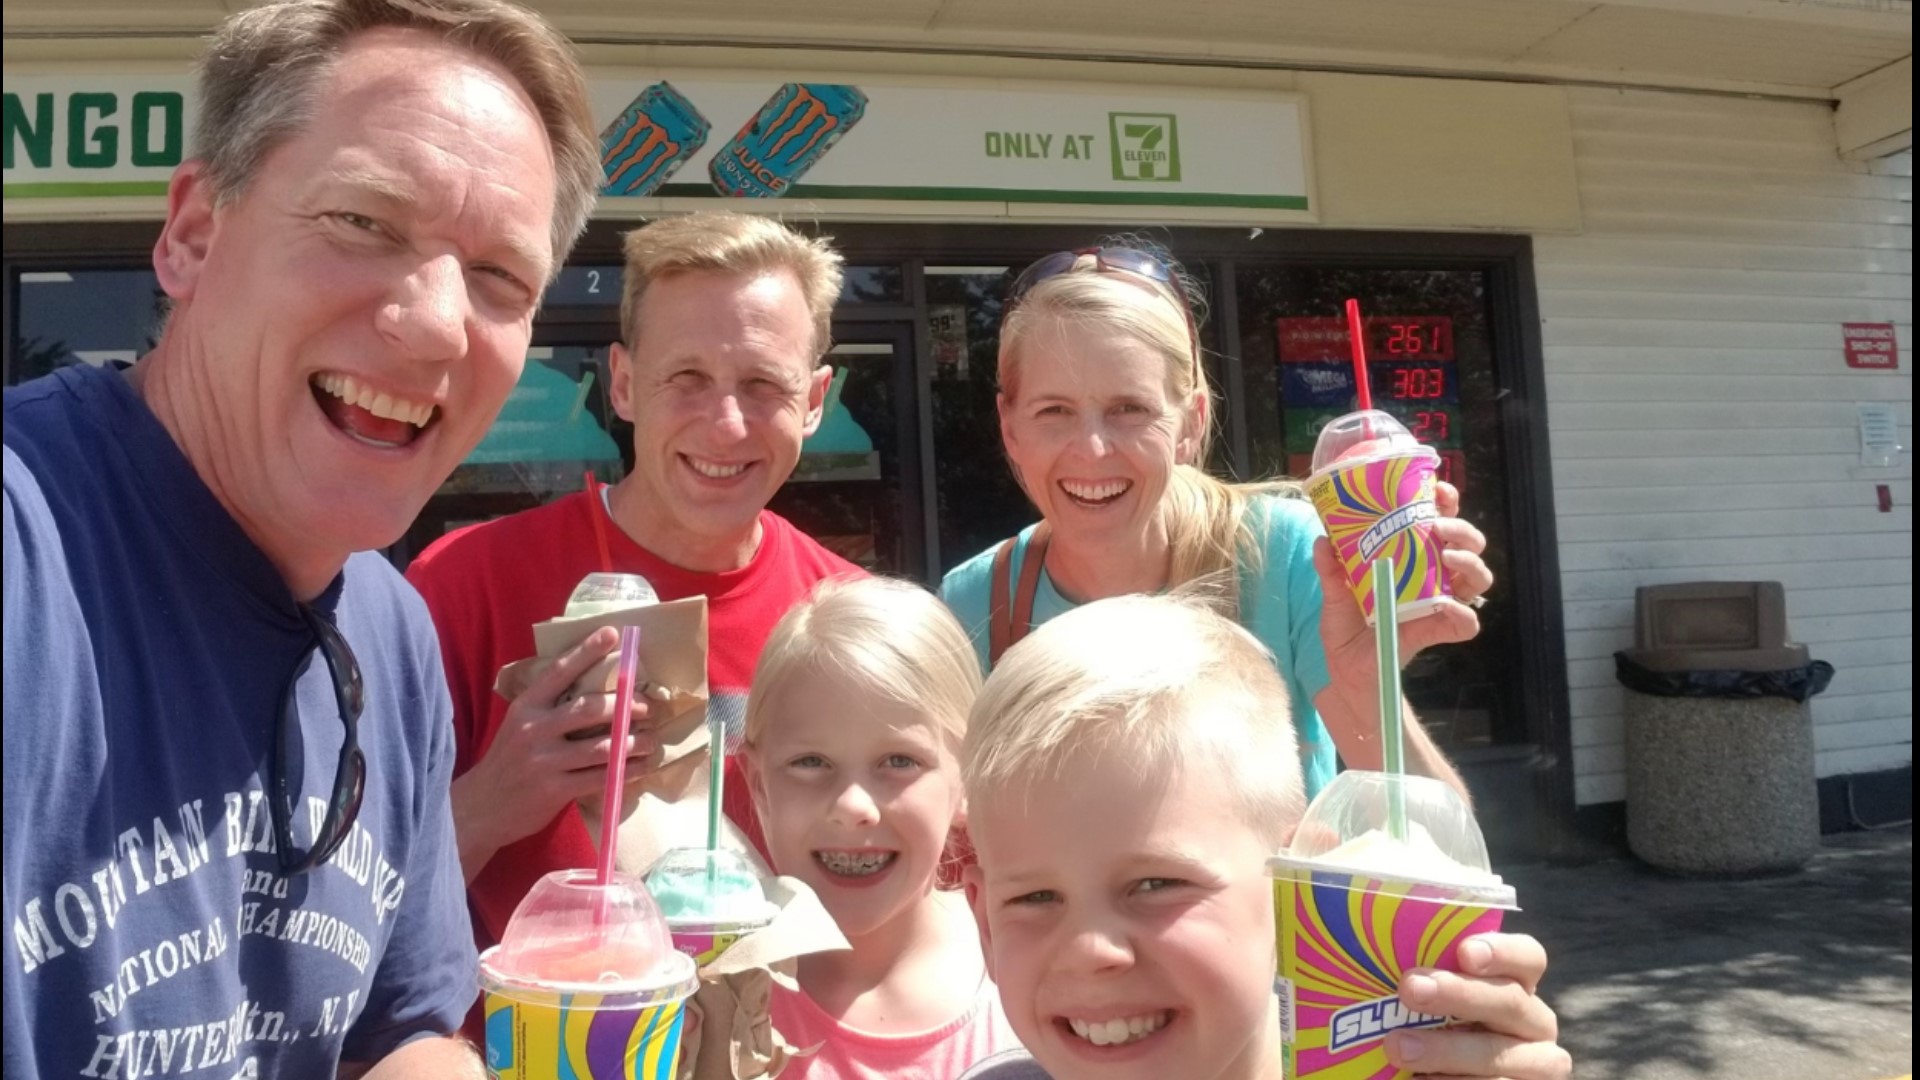 Enjoy a free Slurpee from 7-Eleven on Tuesday